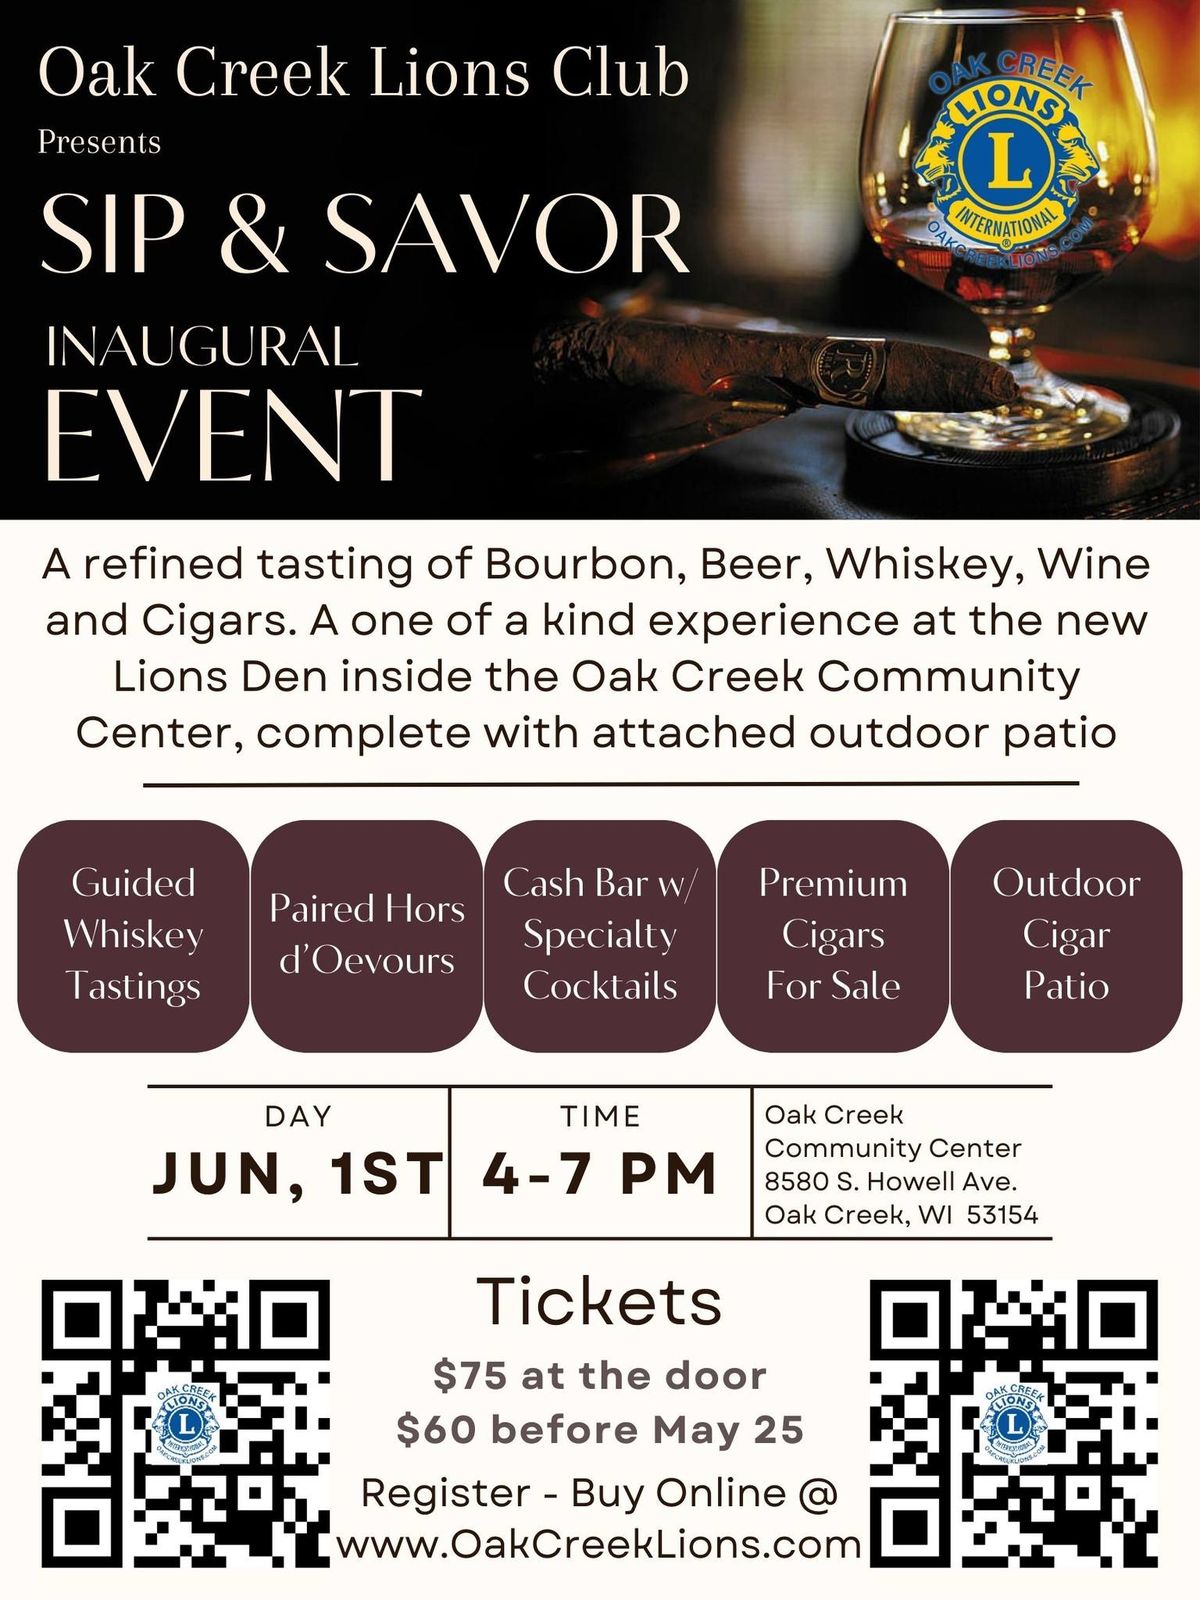 Sip & Savor - A refined bourbon, beer, whiskey, wine and cigar tasting